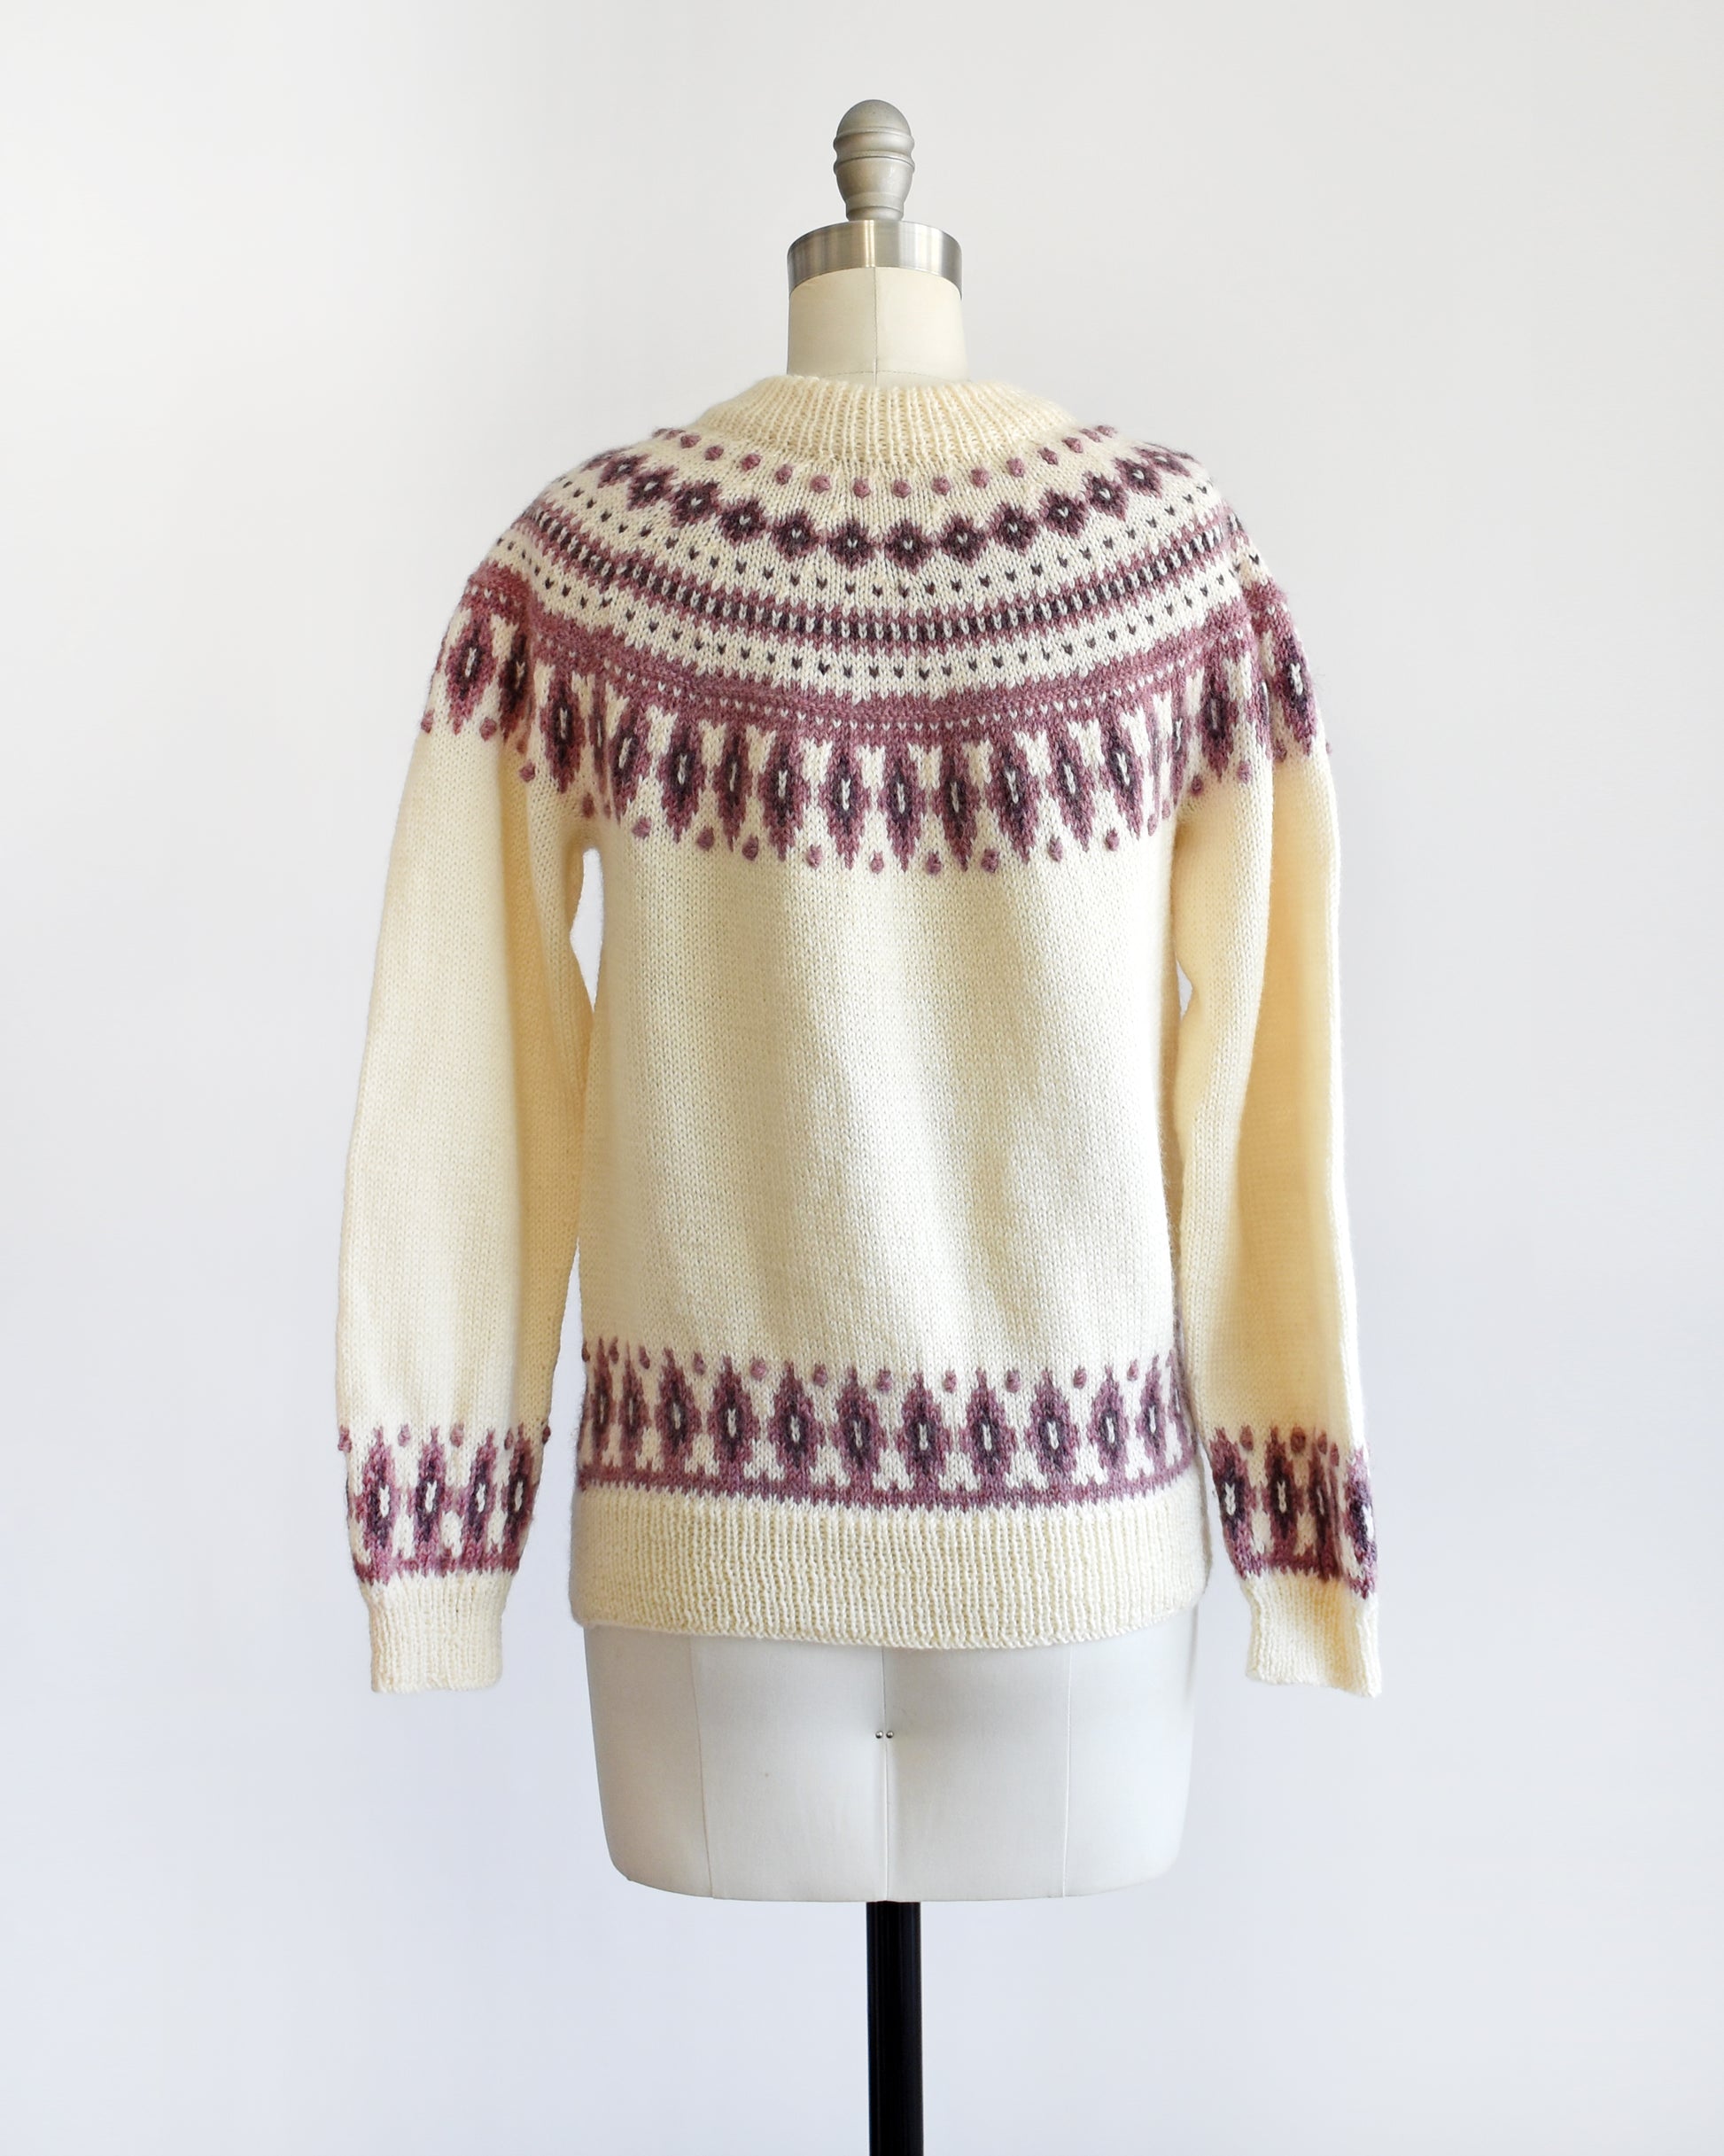 Back view of a vintage 1980s Dale of Norway cream wool sweater that has a purple Fair Isle pattern around the collar that's accented with matching purple nubby details.